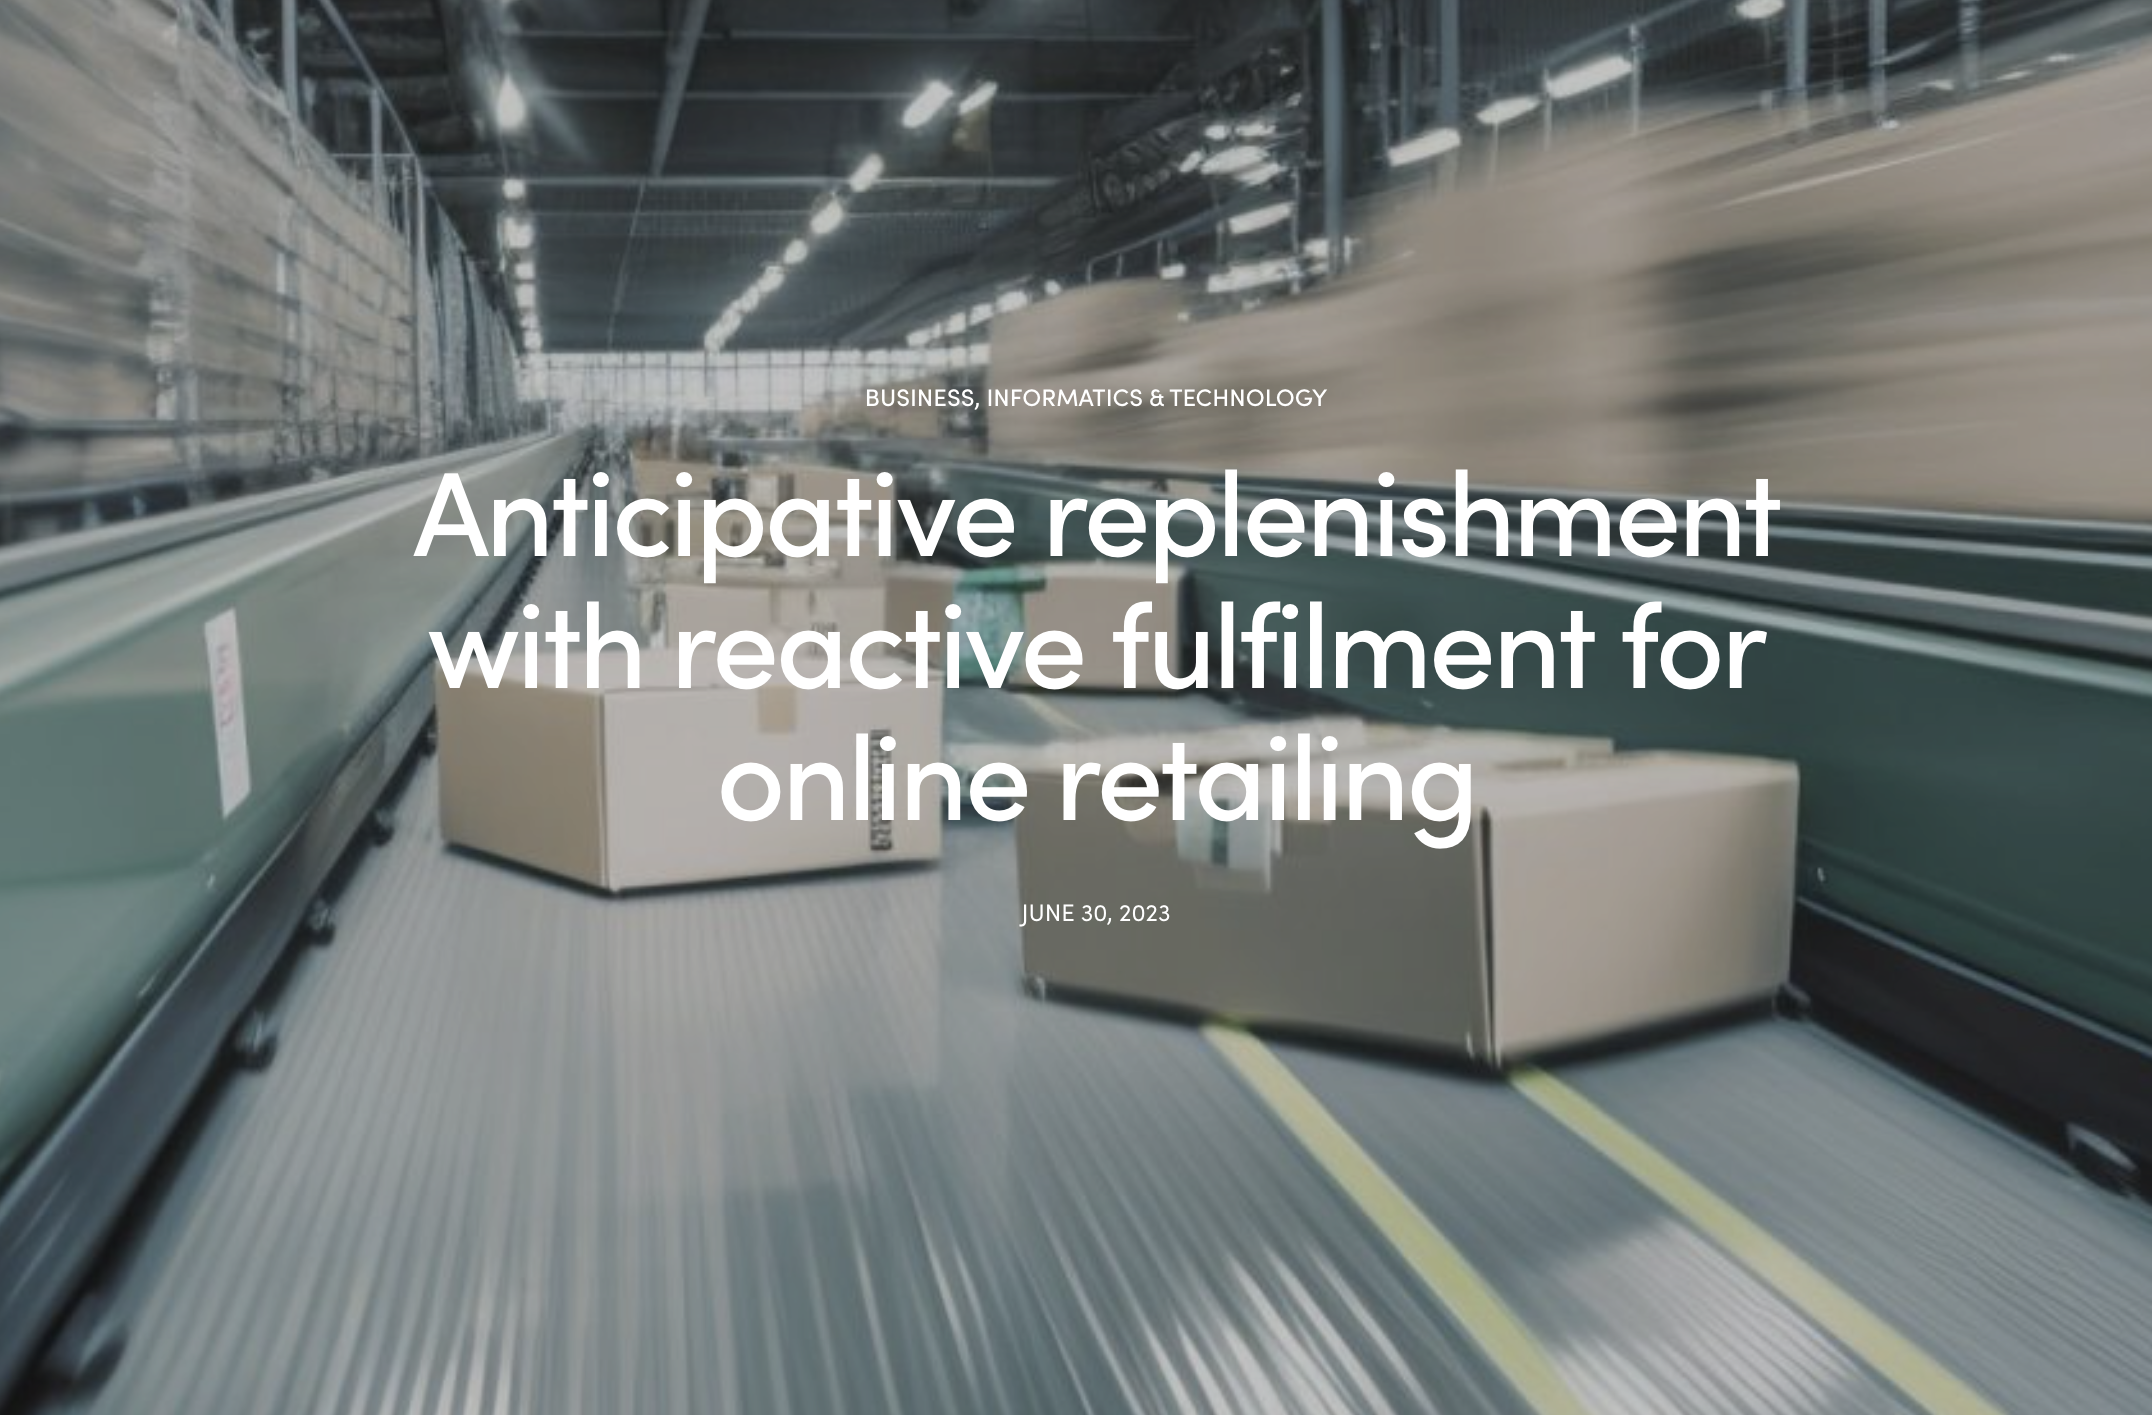 Anticipative replenishment with reactive fulfilment for online retailing